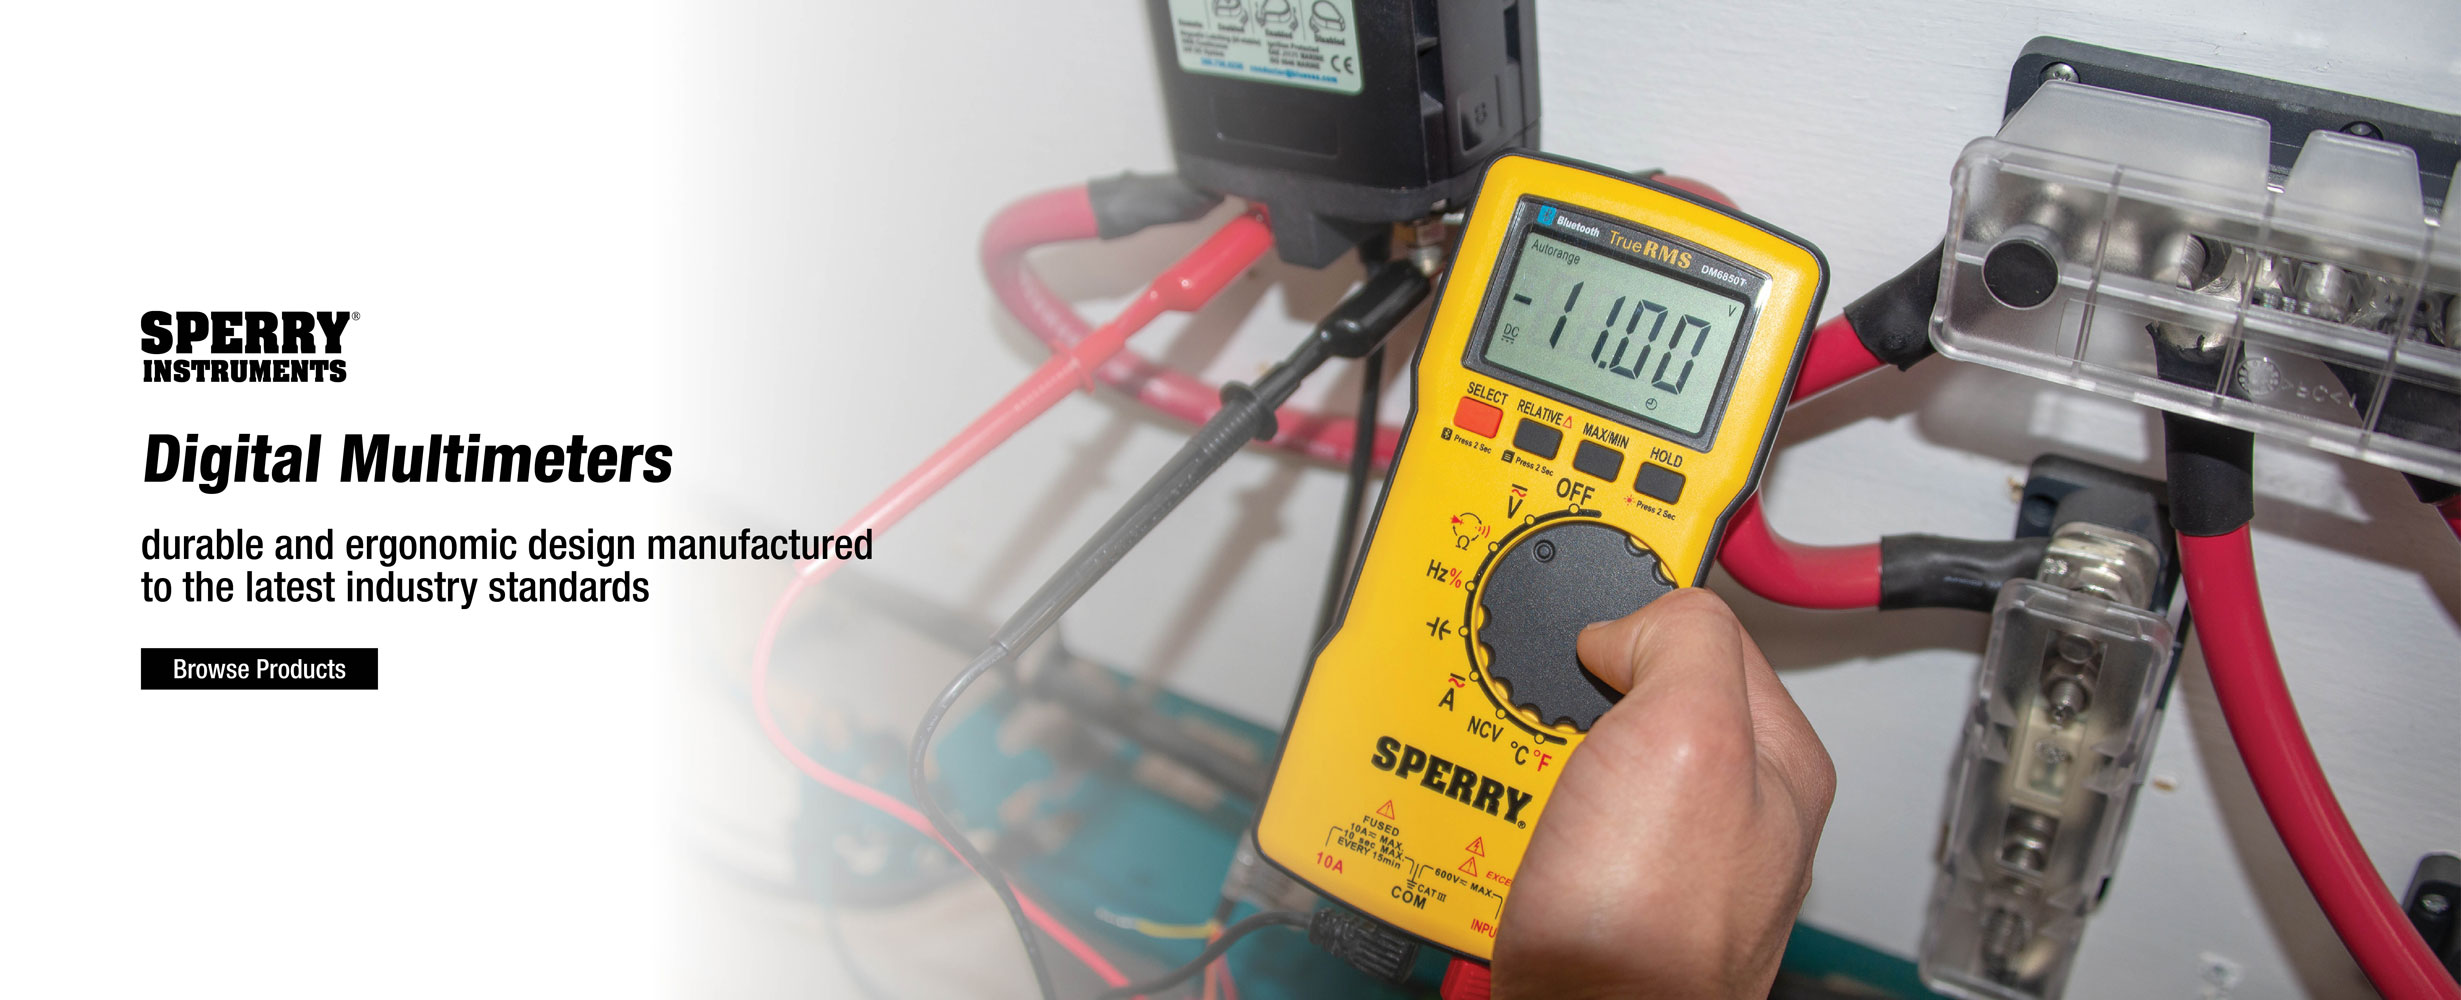 Sperry Instruments | Electrical Test and Measurement Tools